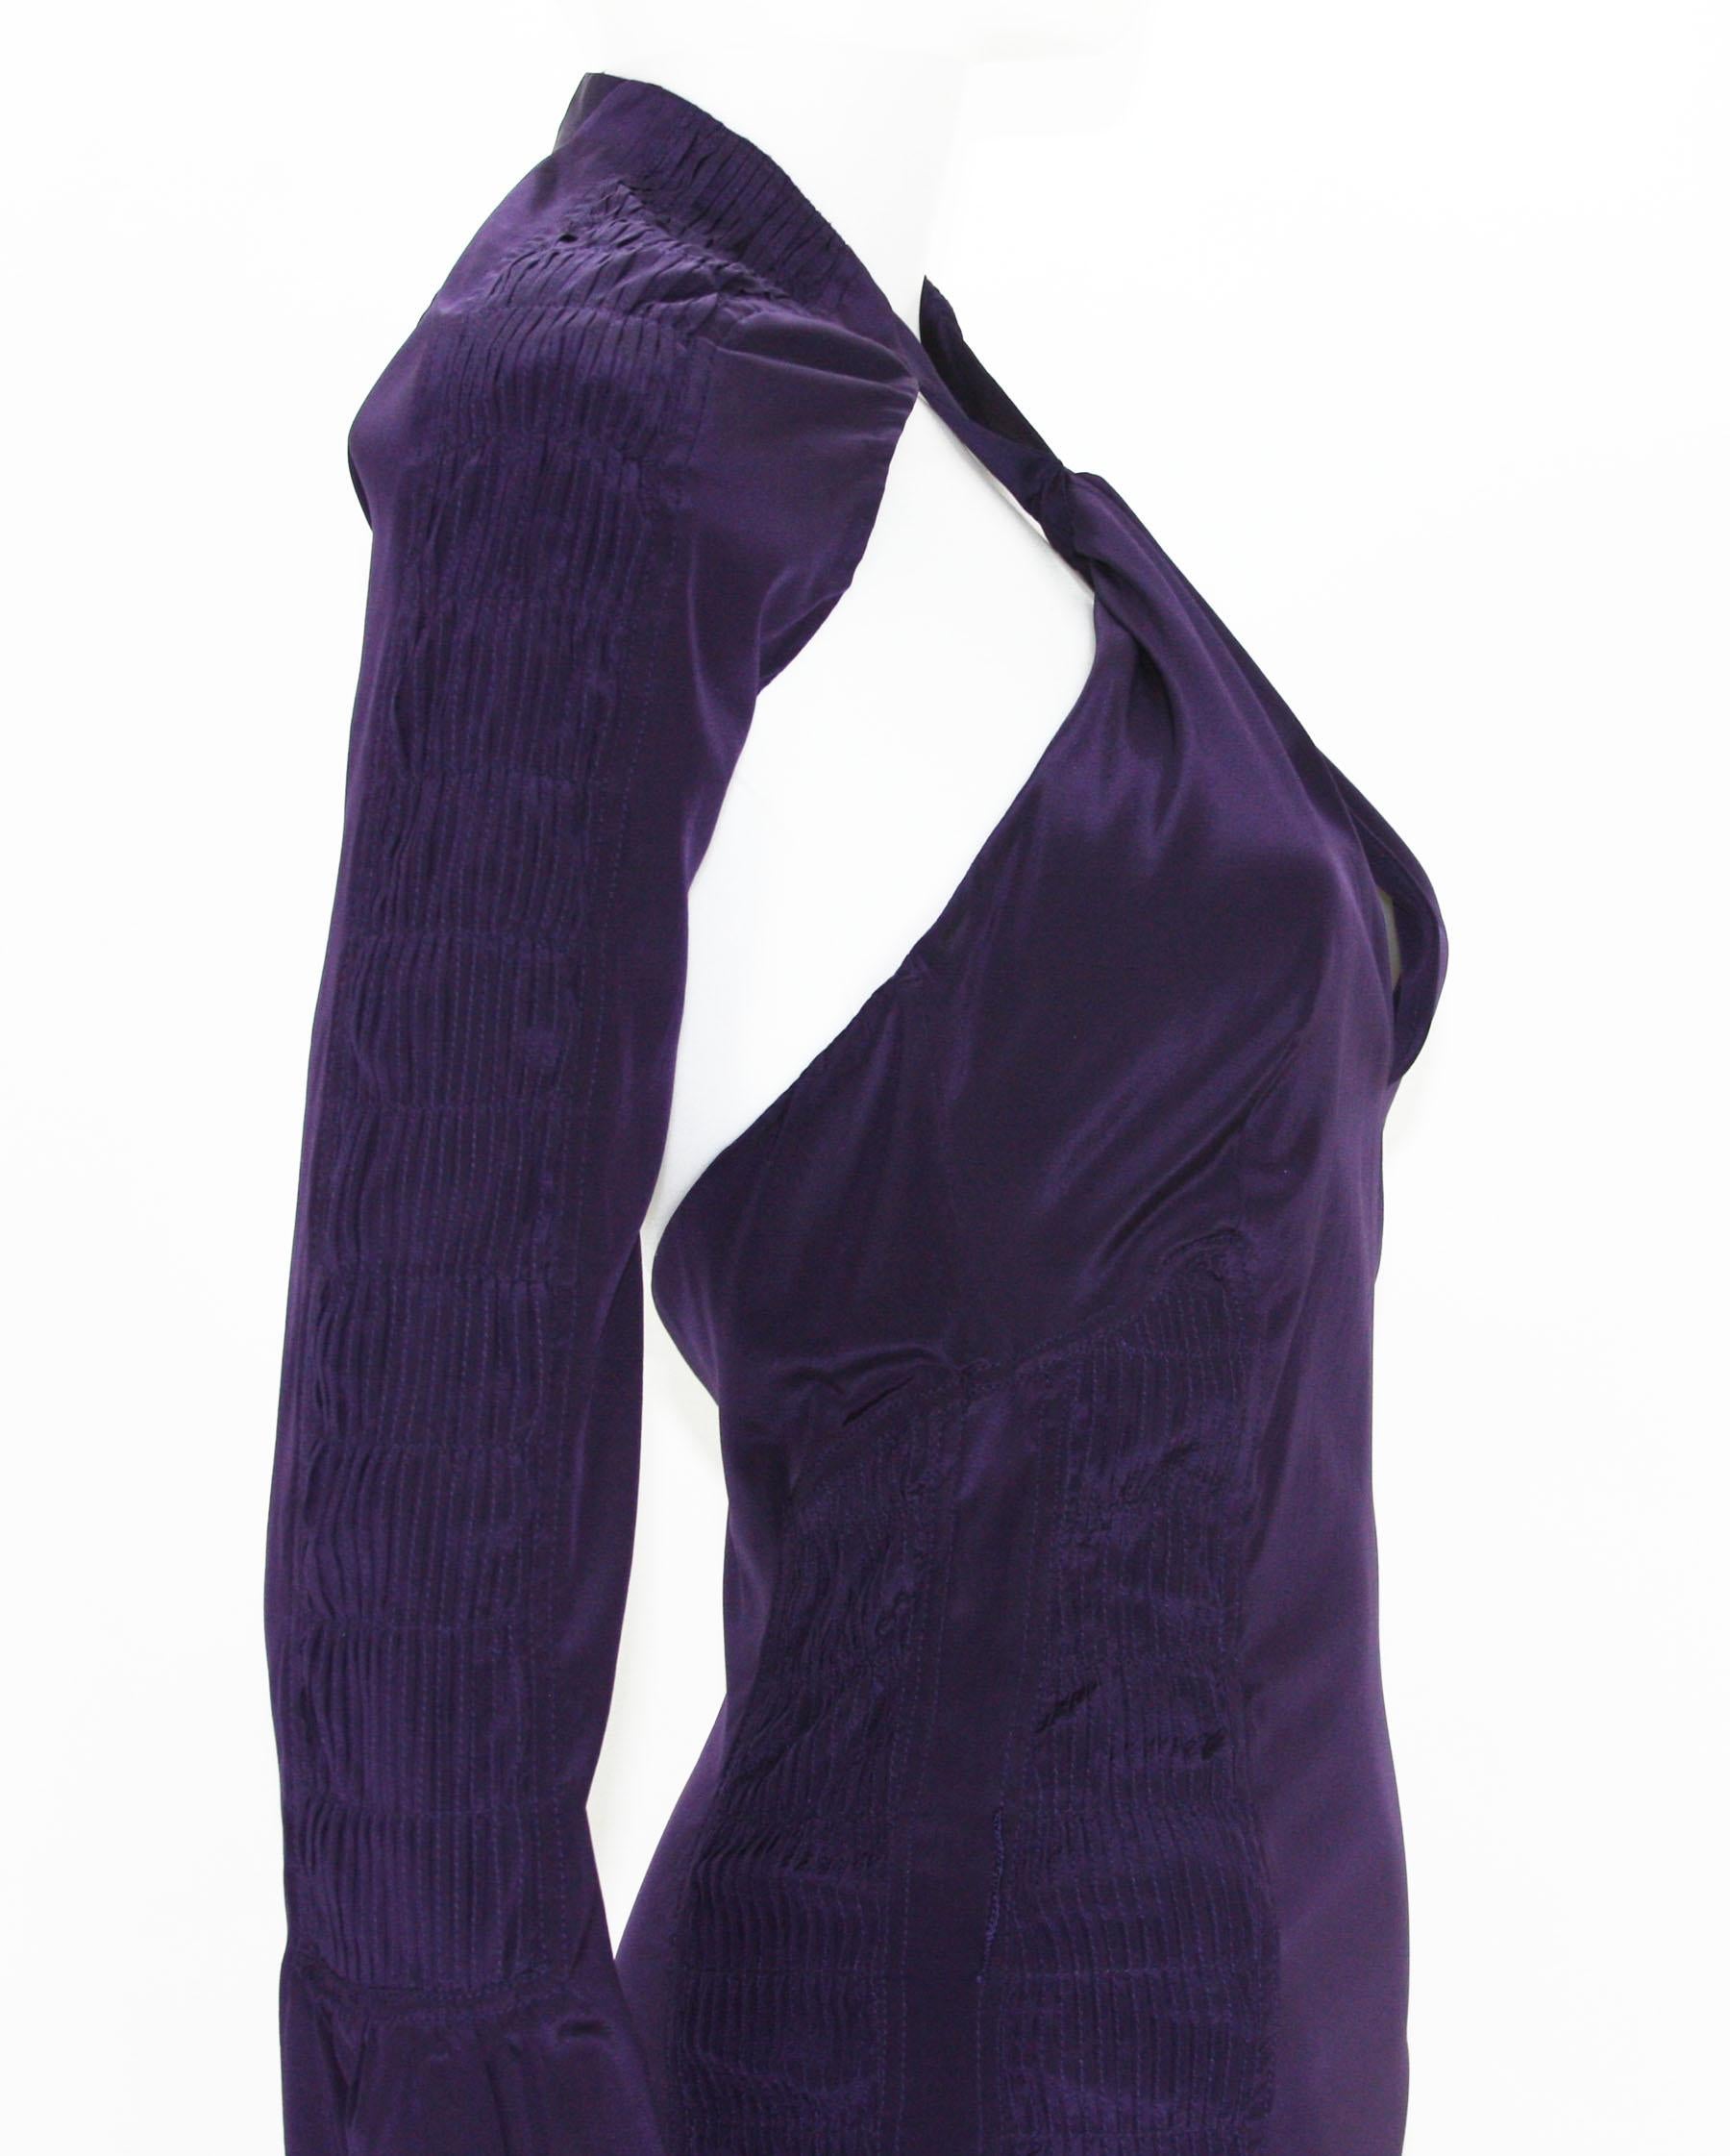 New Tom Ford for Gucci S/S 2004 Deep Purple Silk Plunging Backless Dress 38 & 44 In New Condition For Sale In Montgomery, TX